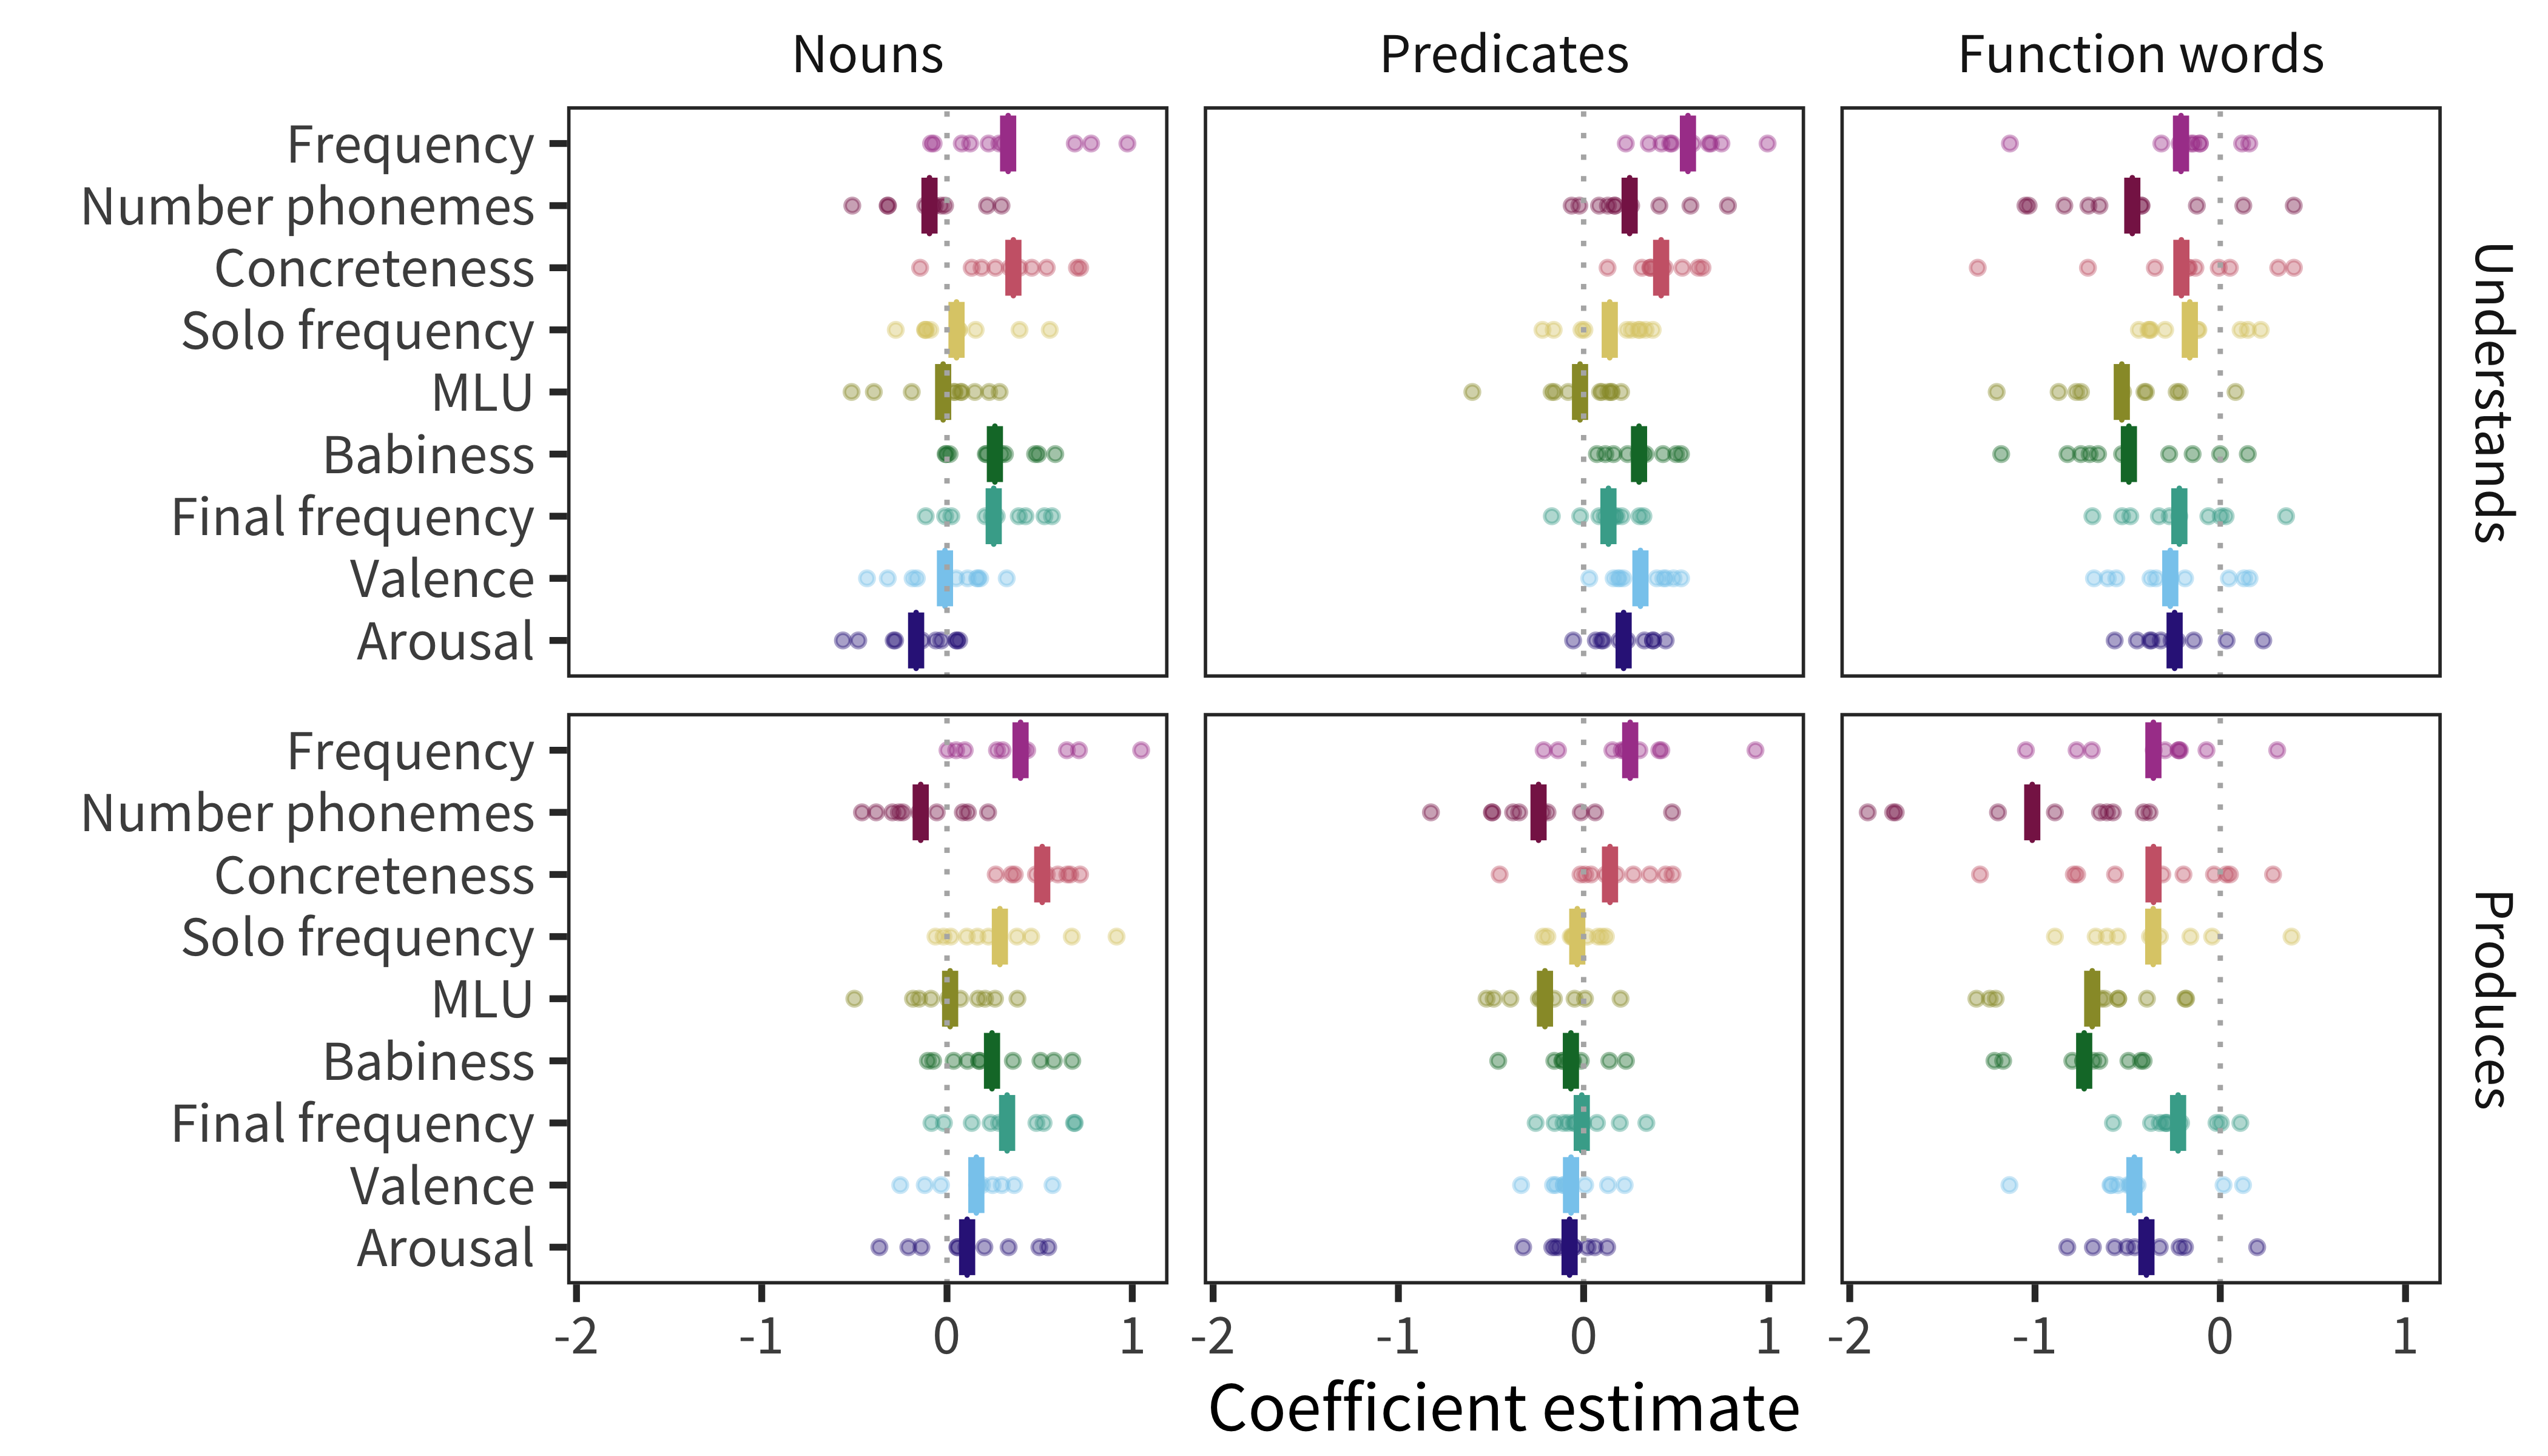 Estimates of effect in predicting words' developmental trajectories for each language, measure, and lexical category (main effect of predictor + main effect of lexical category + interaction between predictor and lexical category). Each point represents a predictor's effect in one language, with the bar showing the mean across languages.